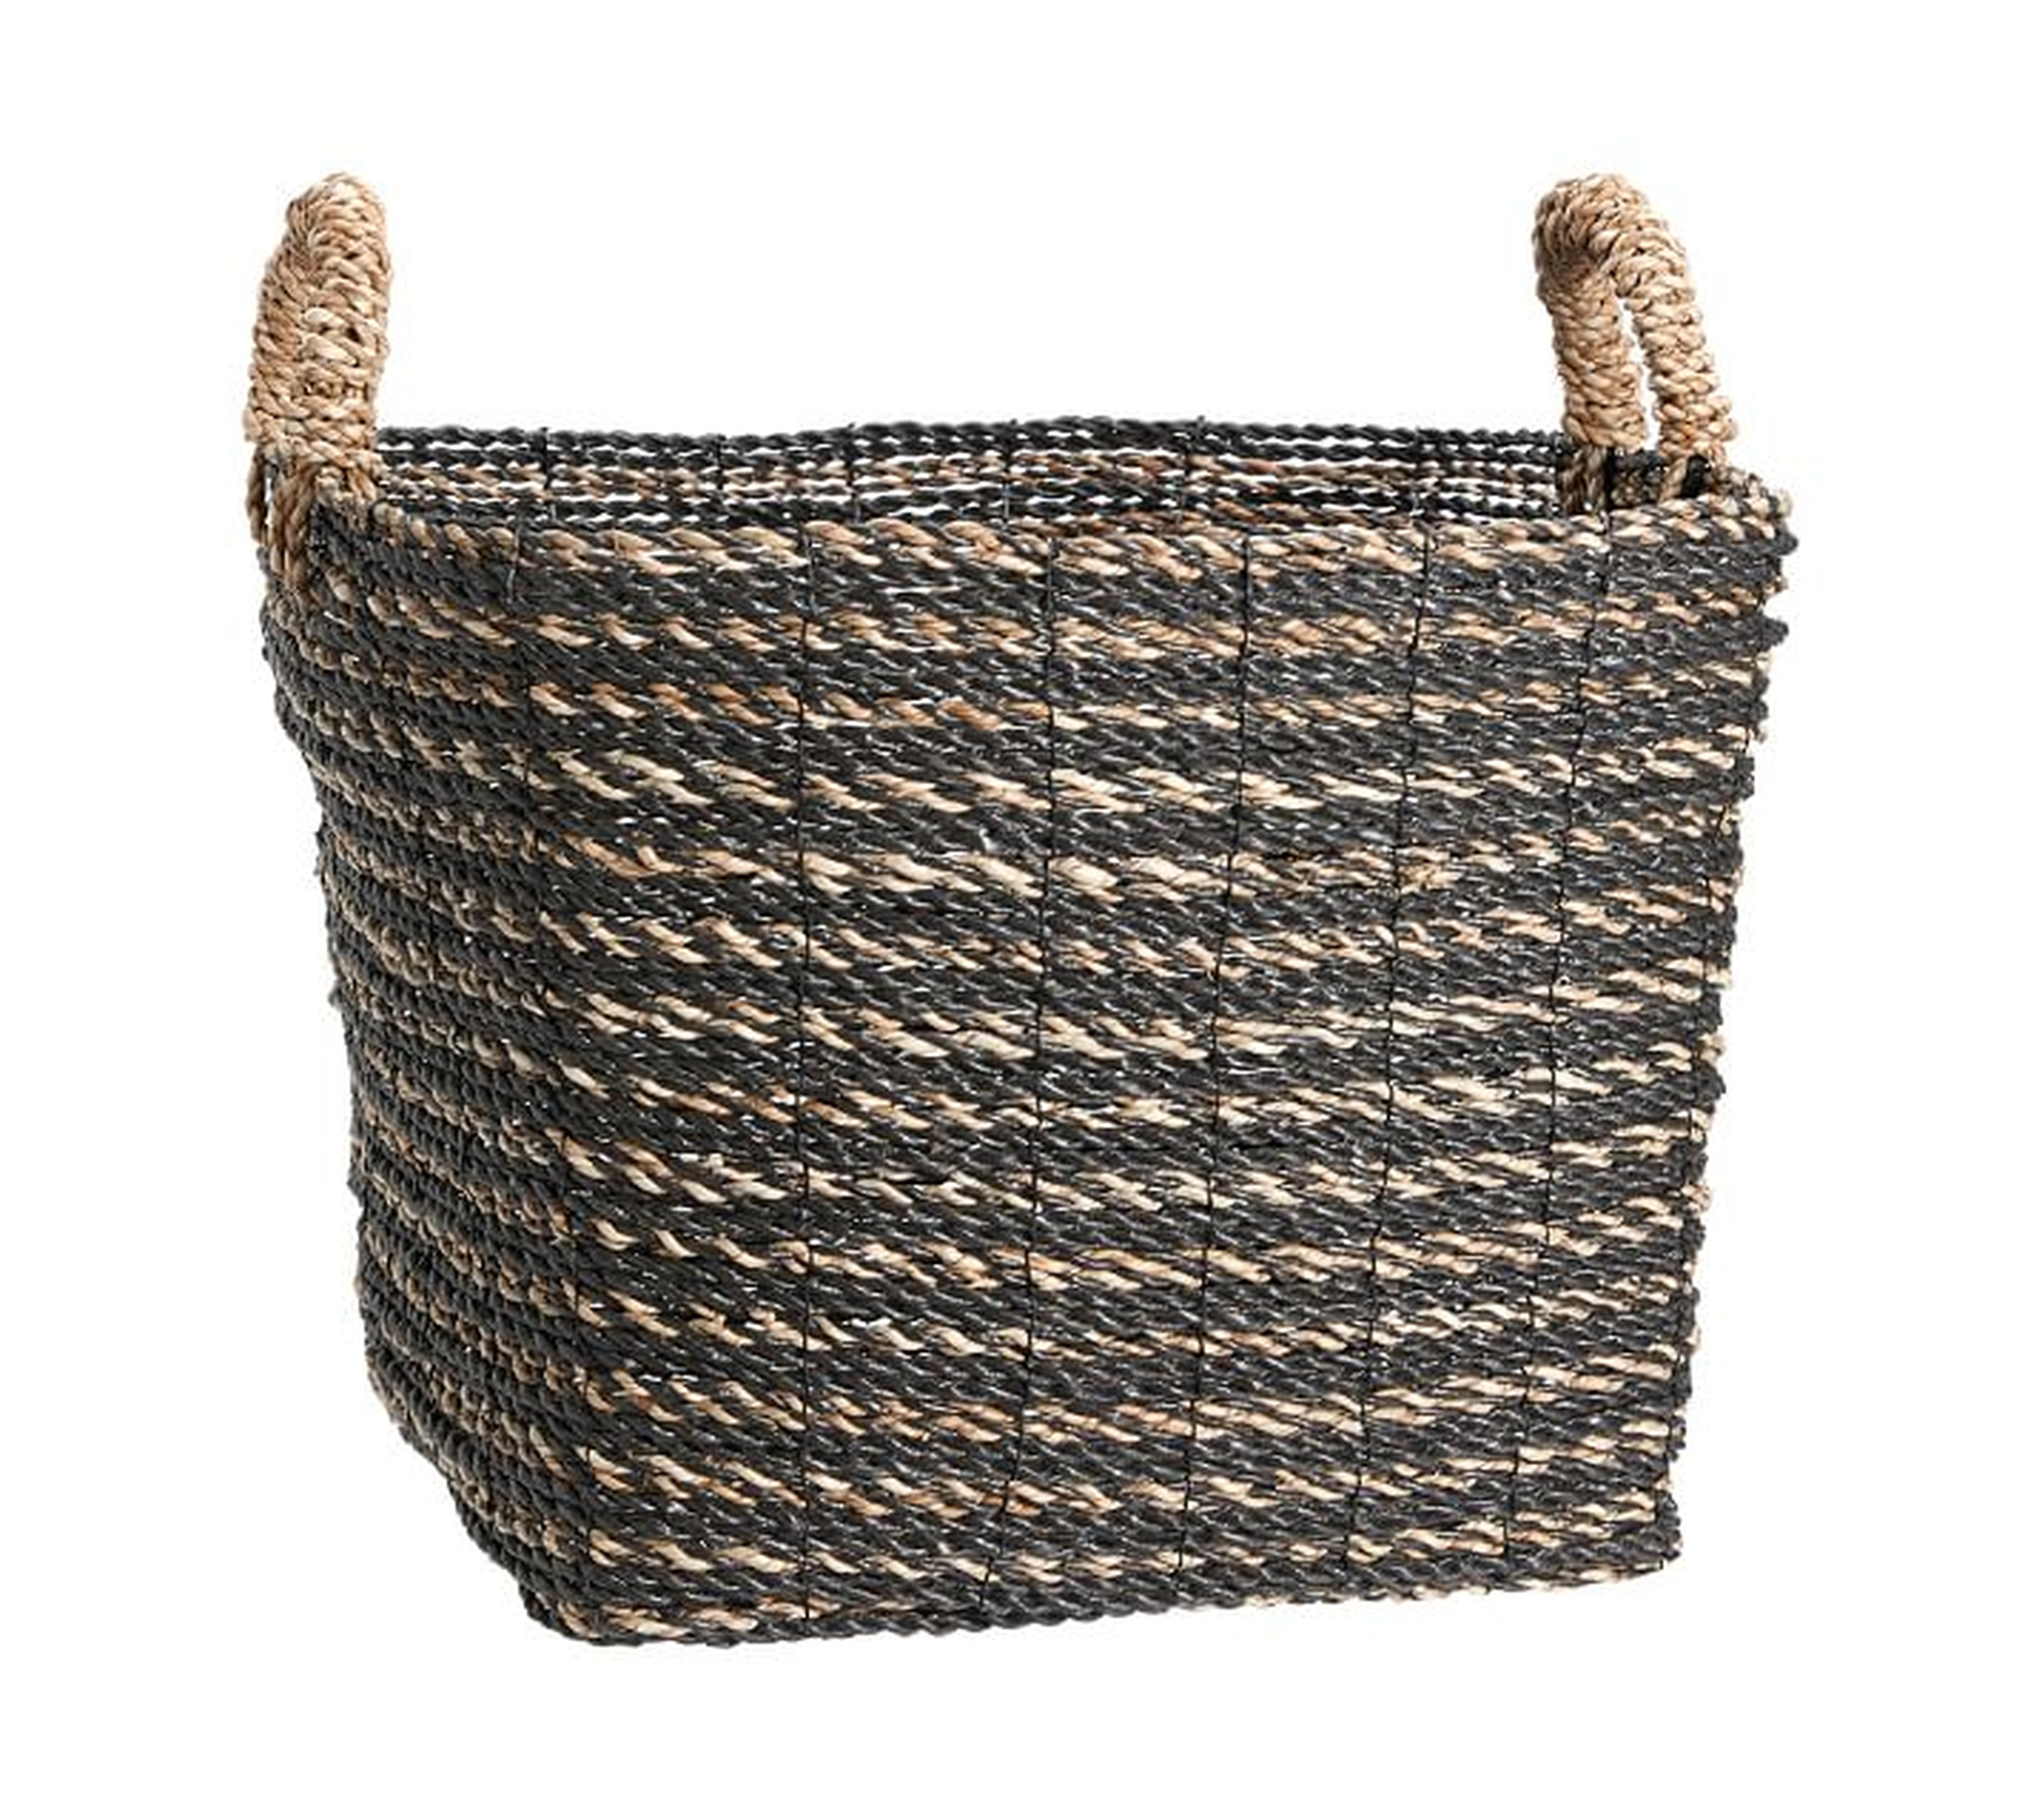 Asher Tote Basket Large, Charcoal/Natural - Pottery Barn